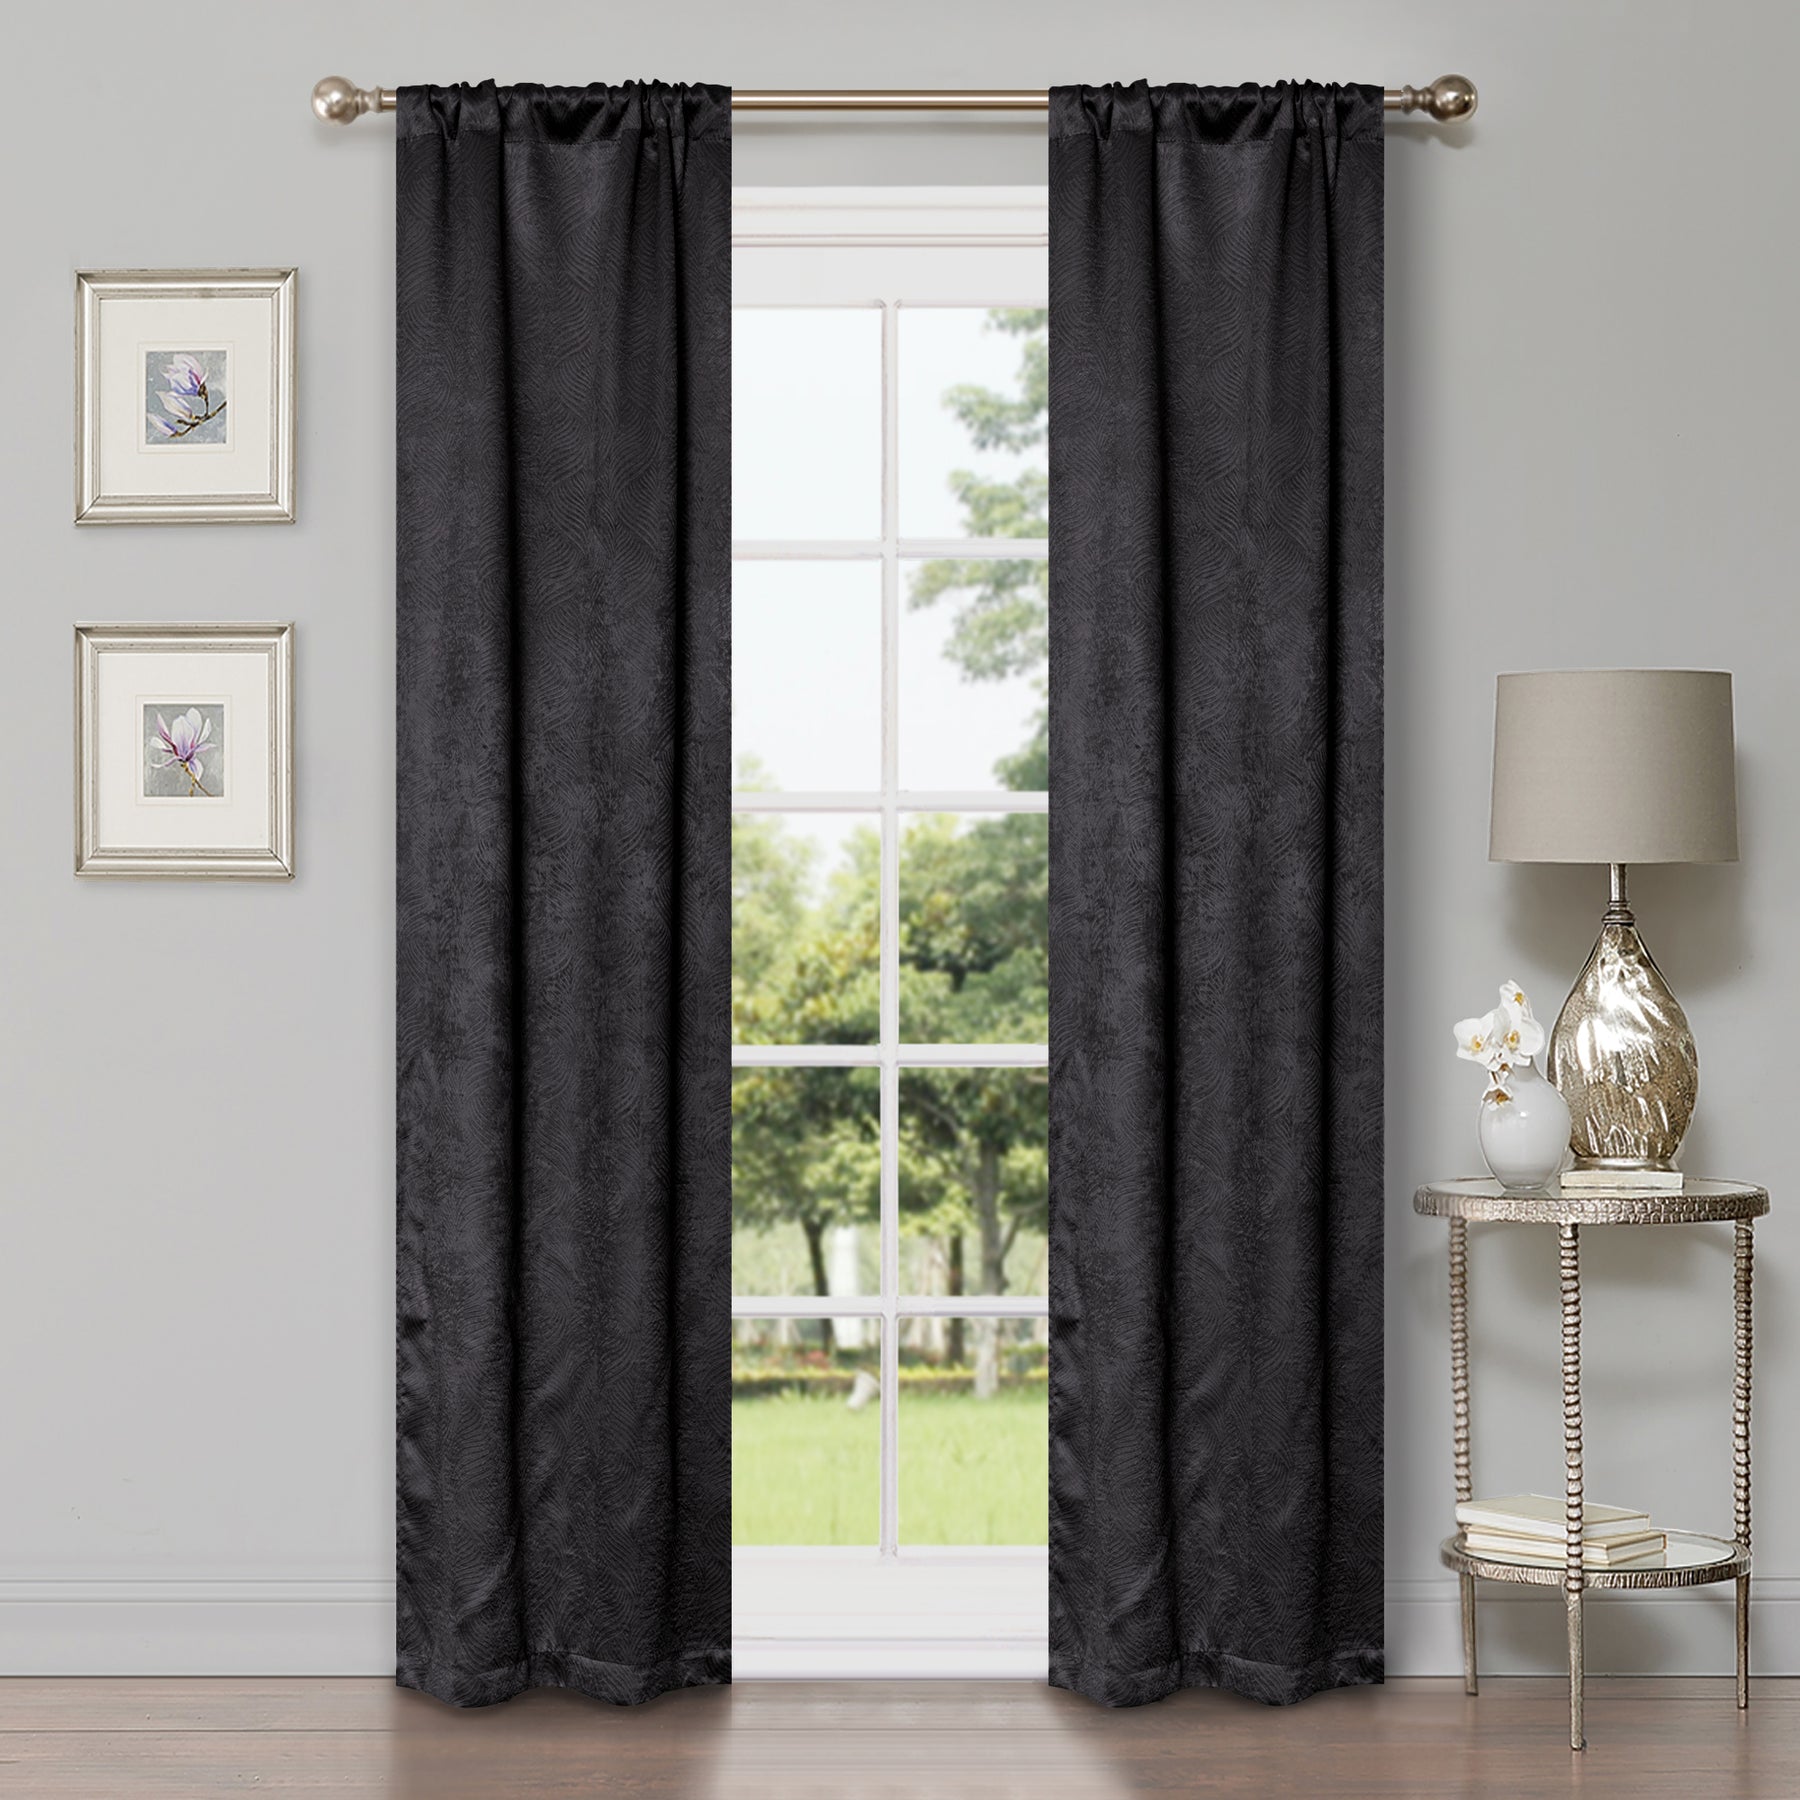 Waverly Thermal Blackout Grommet 2 Piece Curtain Panel Set - Gray